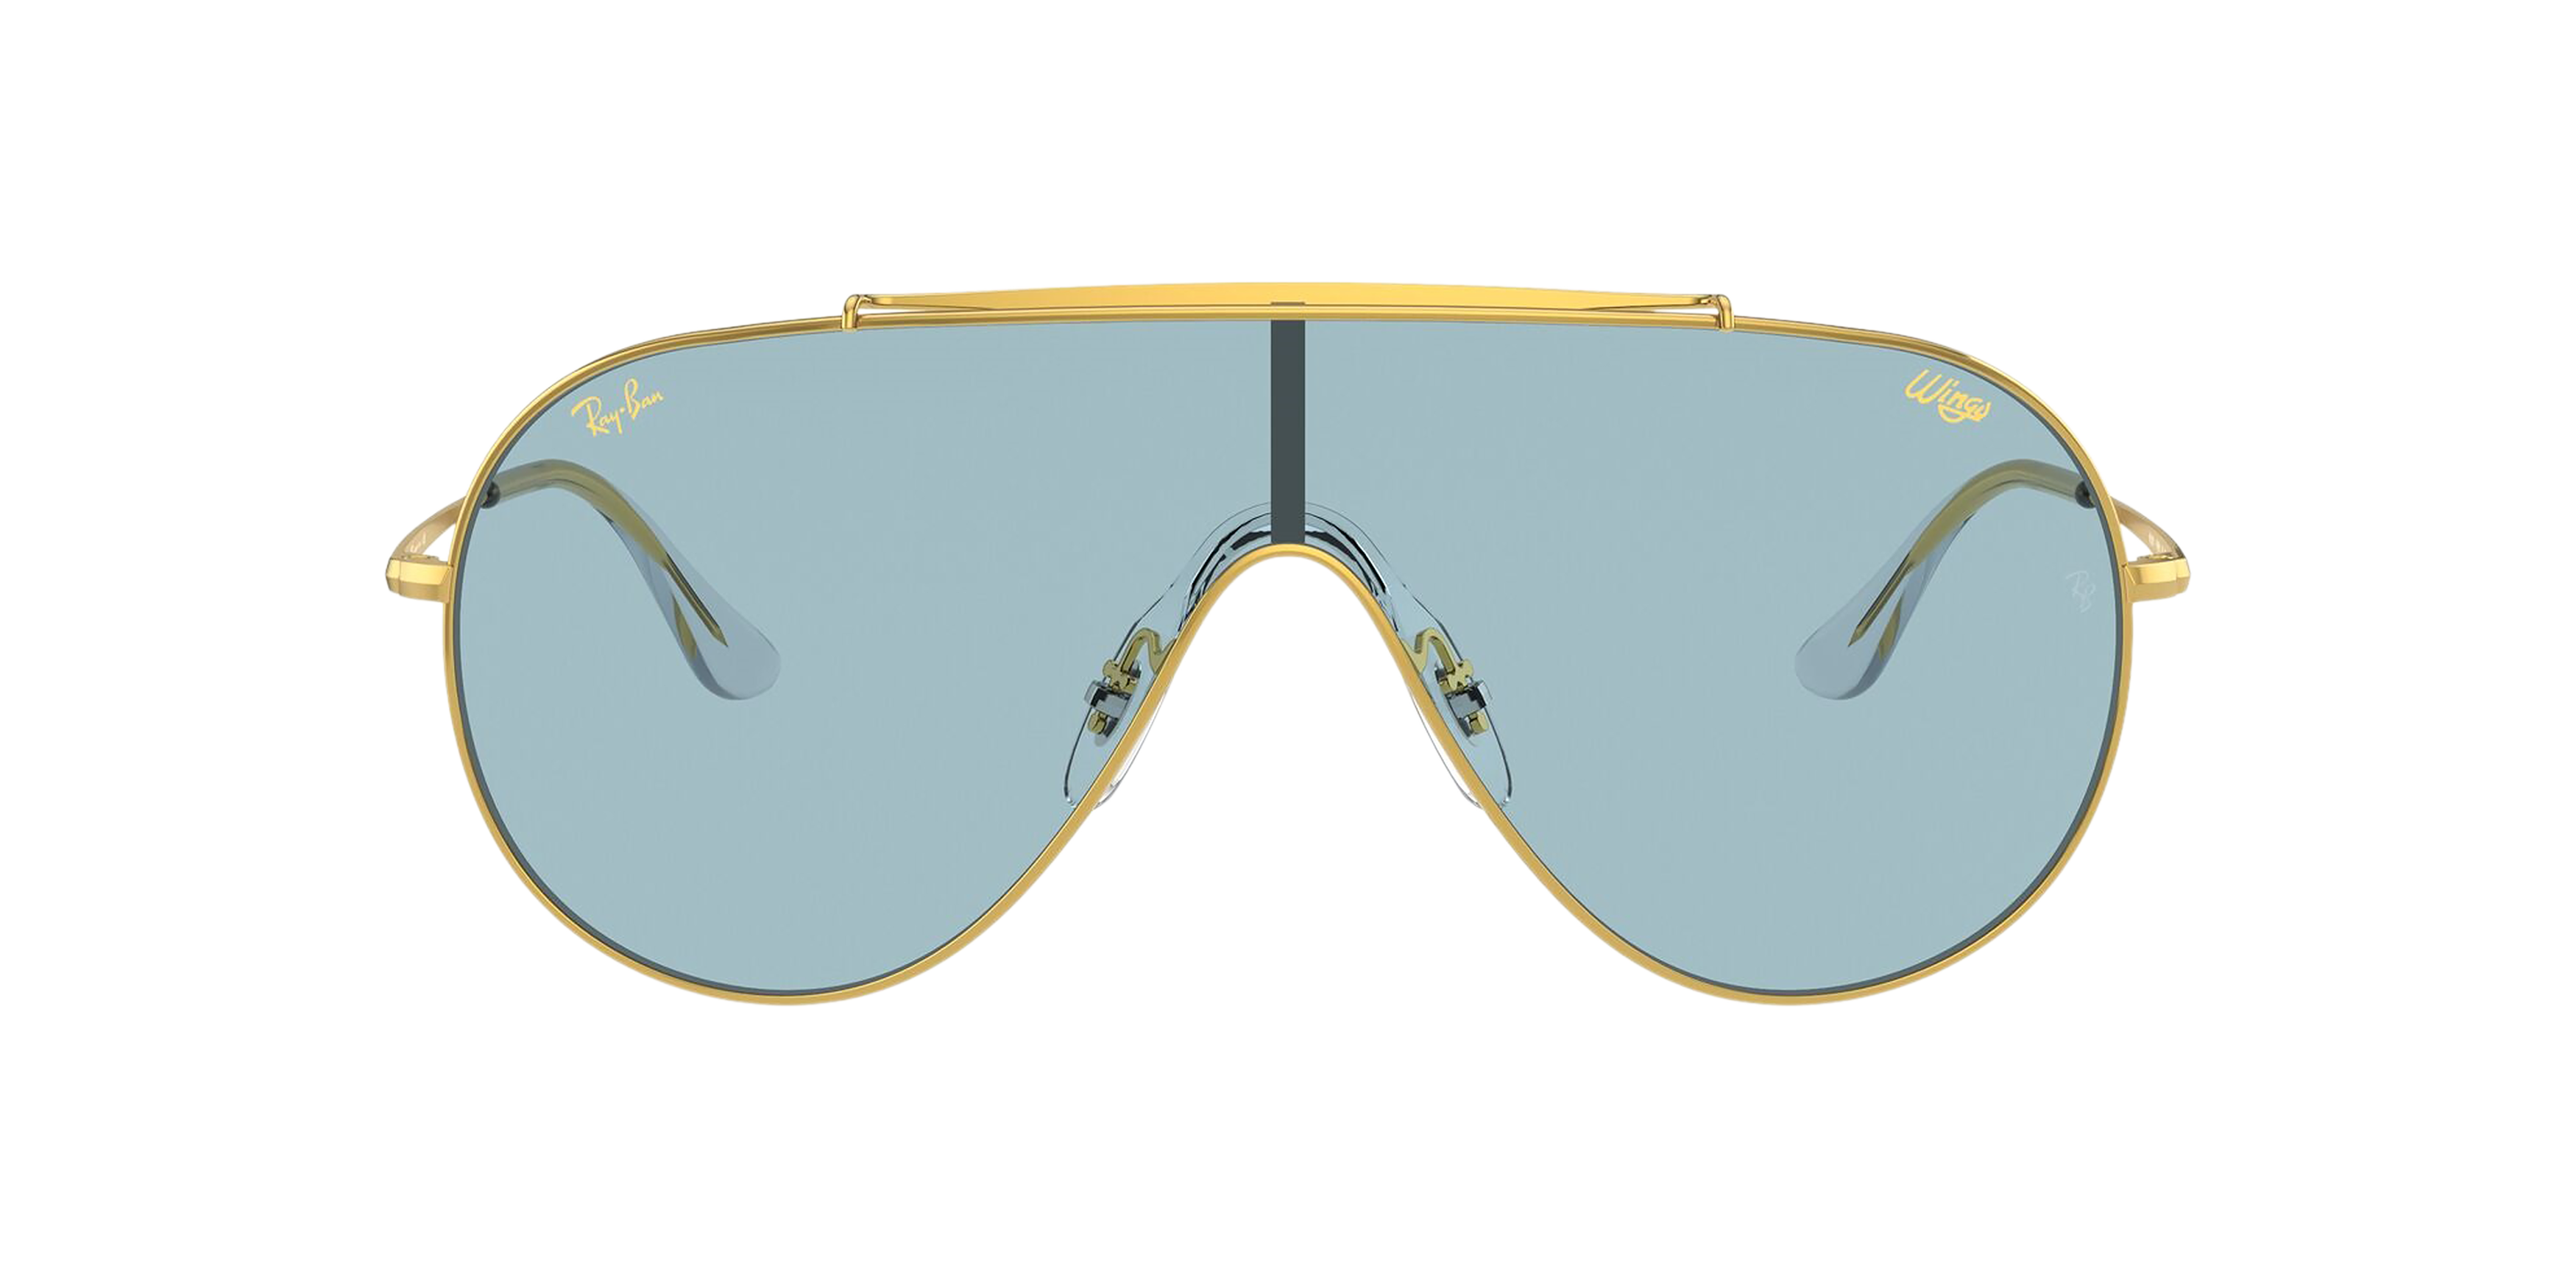 [products.image.front] Ray-Ban Wings Legend Gold RB3597 919680